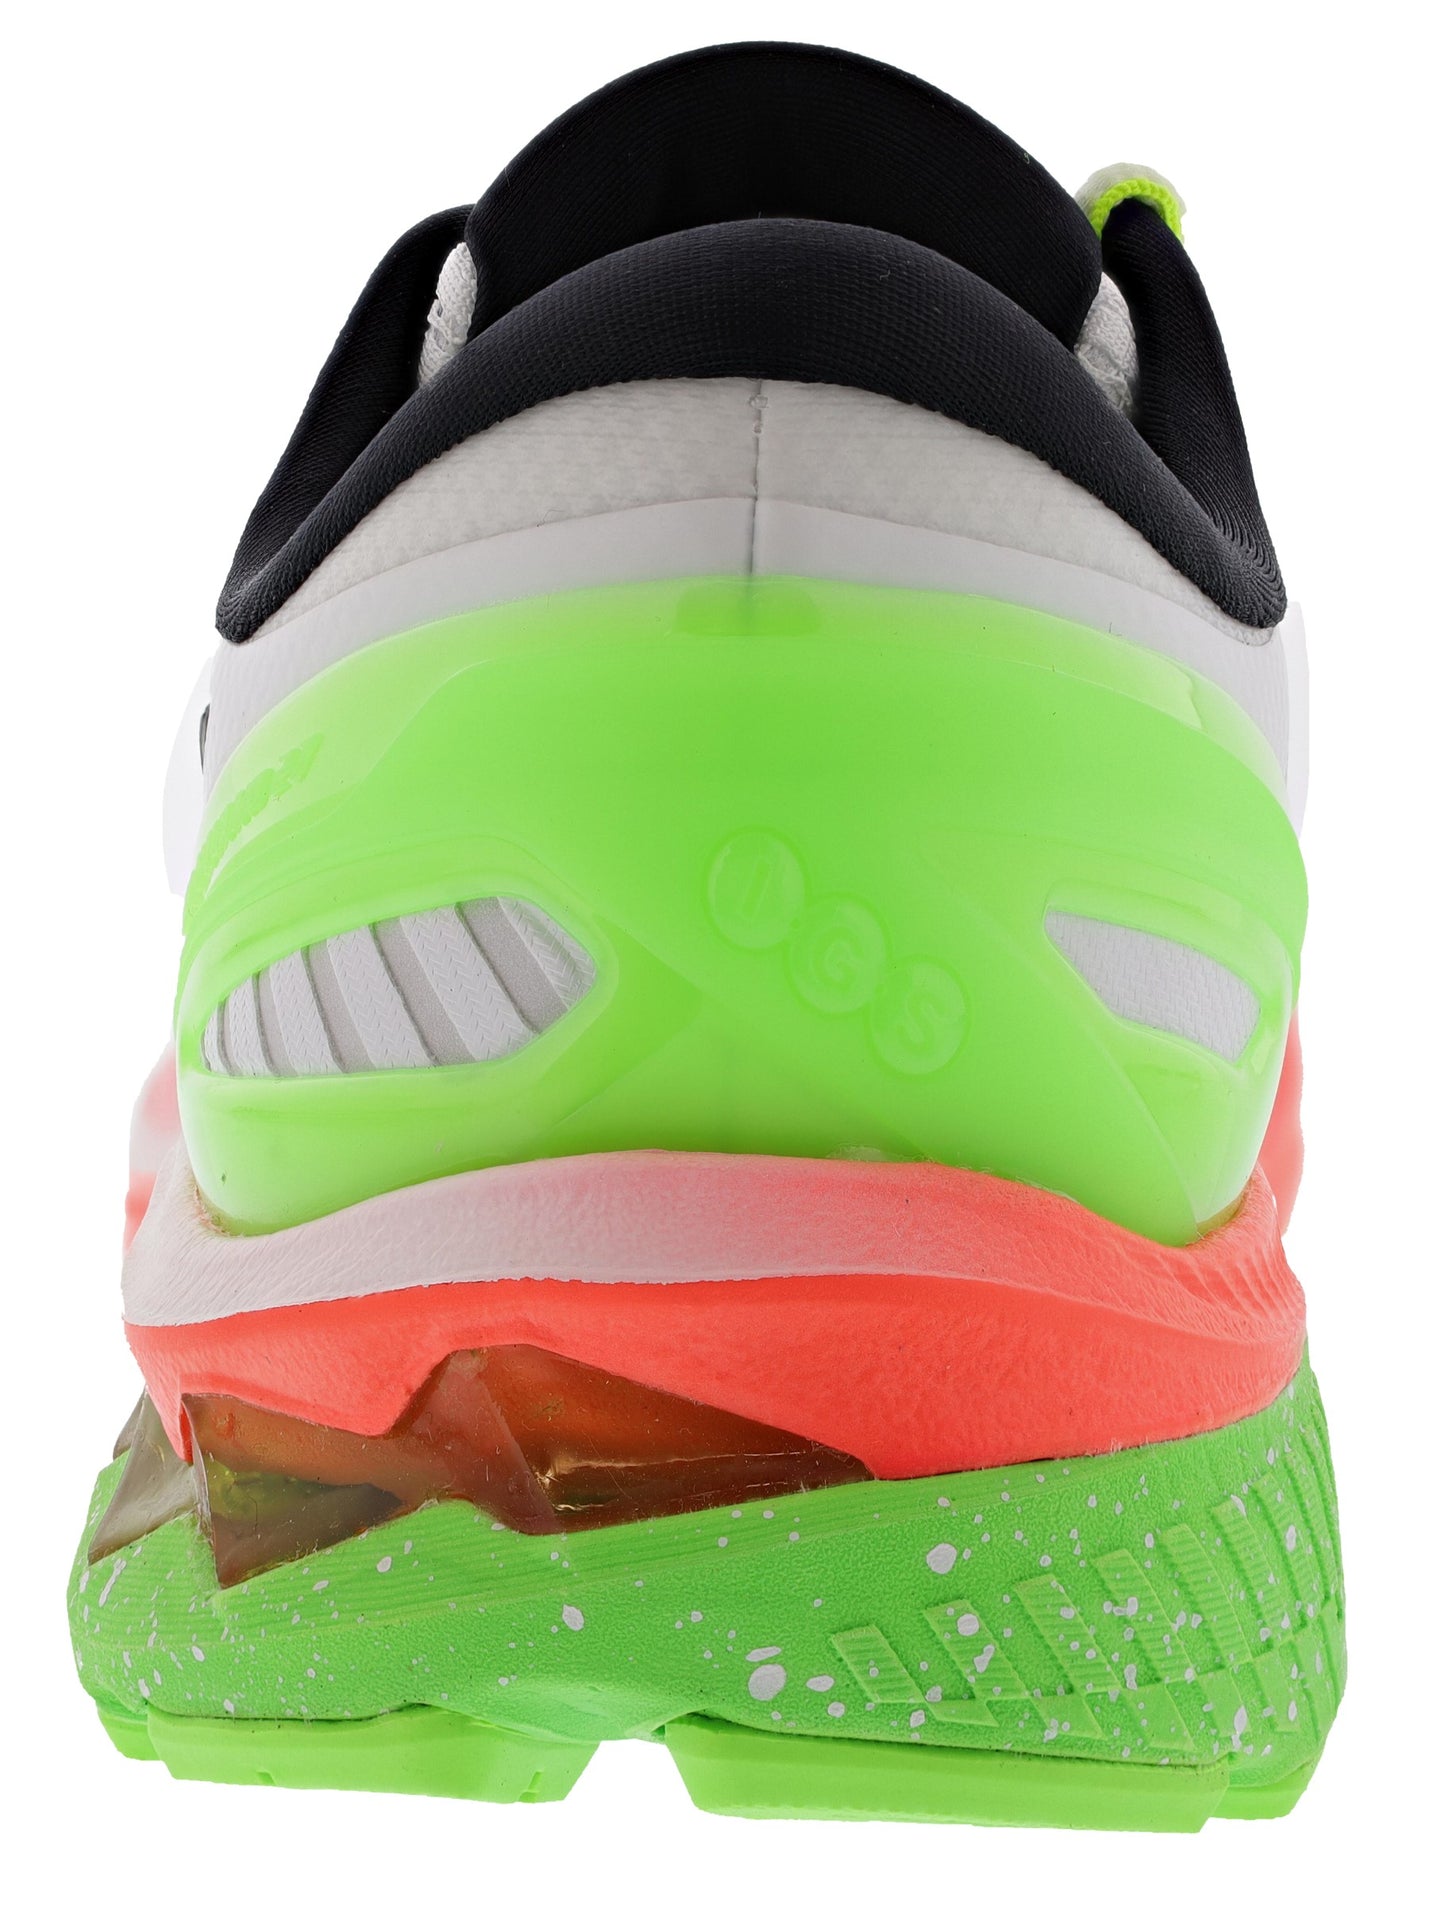 
                  
                    Back of White with Pure Silver, Green, and Peach highlights ASICS Men's Gel Kayano 27 Lite Show Cushioned Running Shoes
                  
                